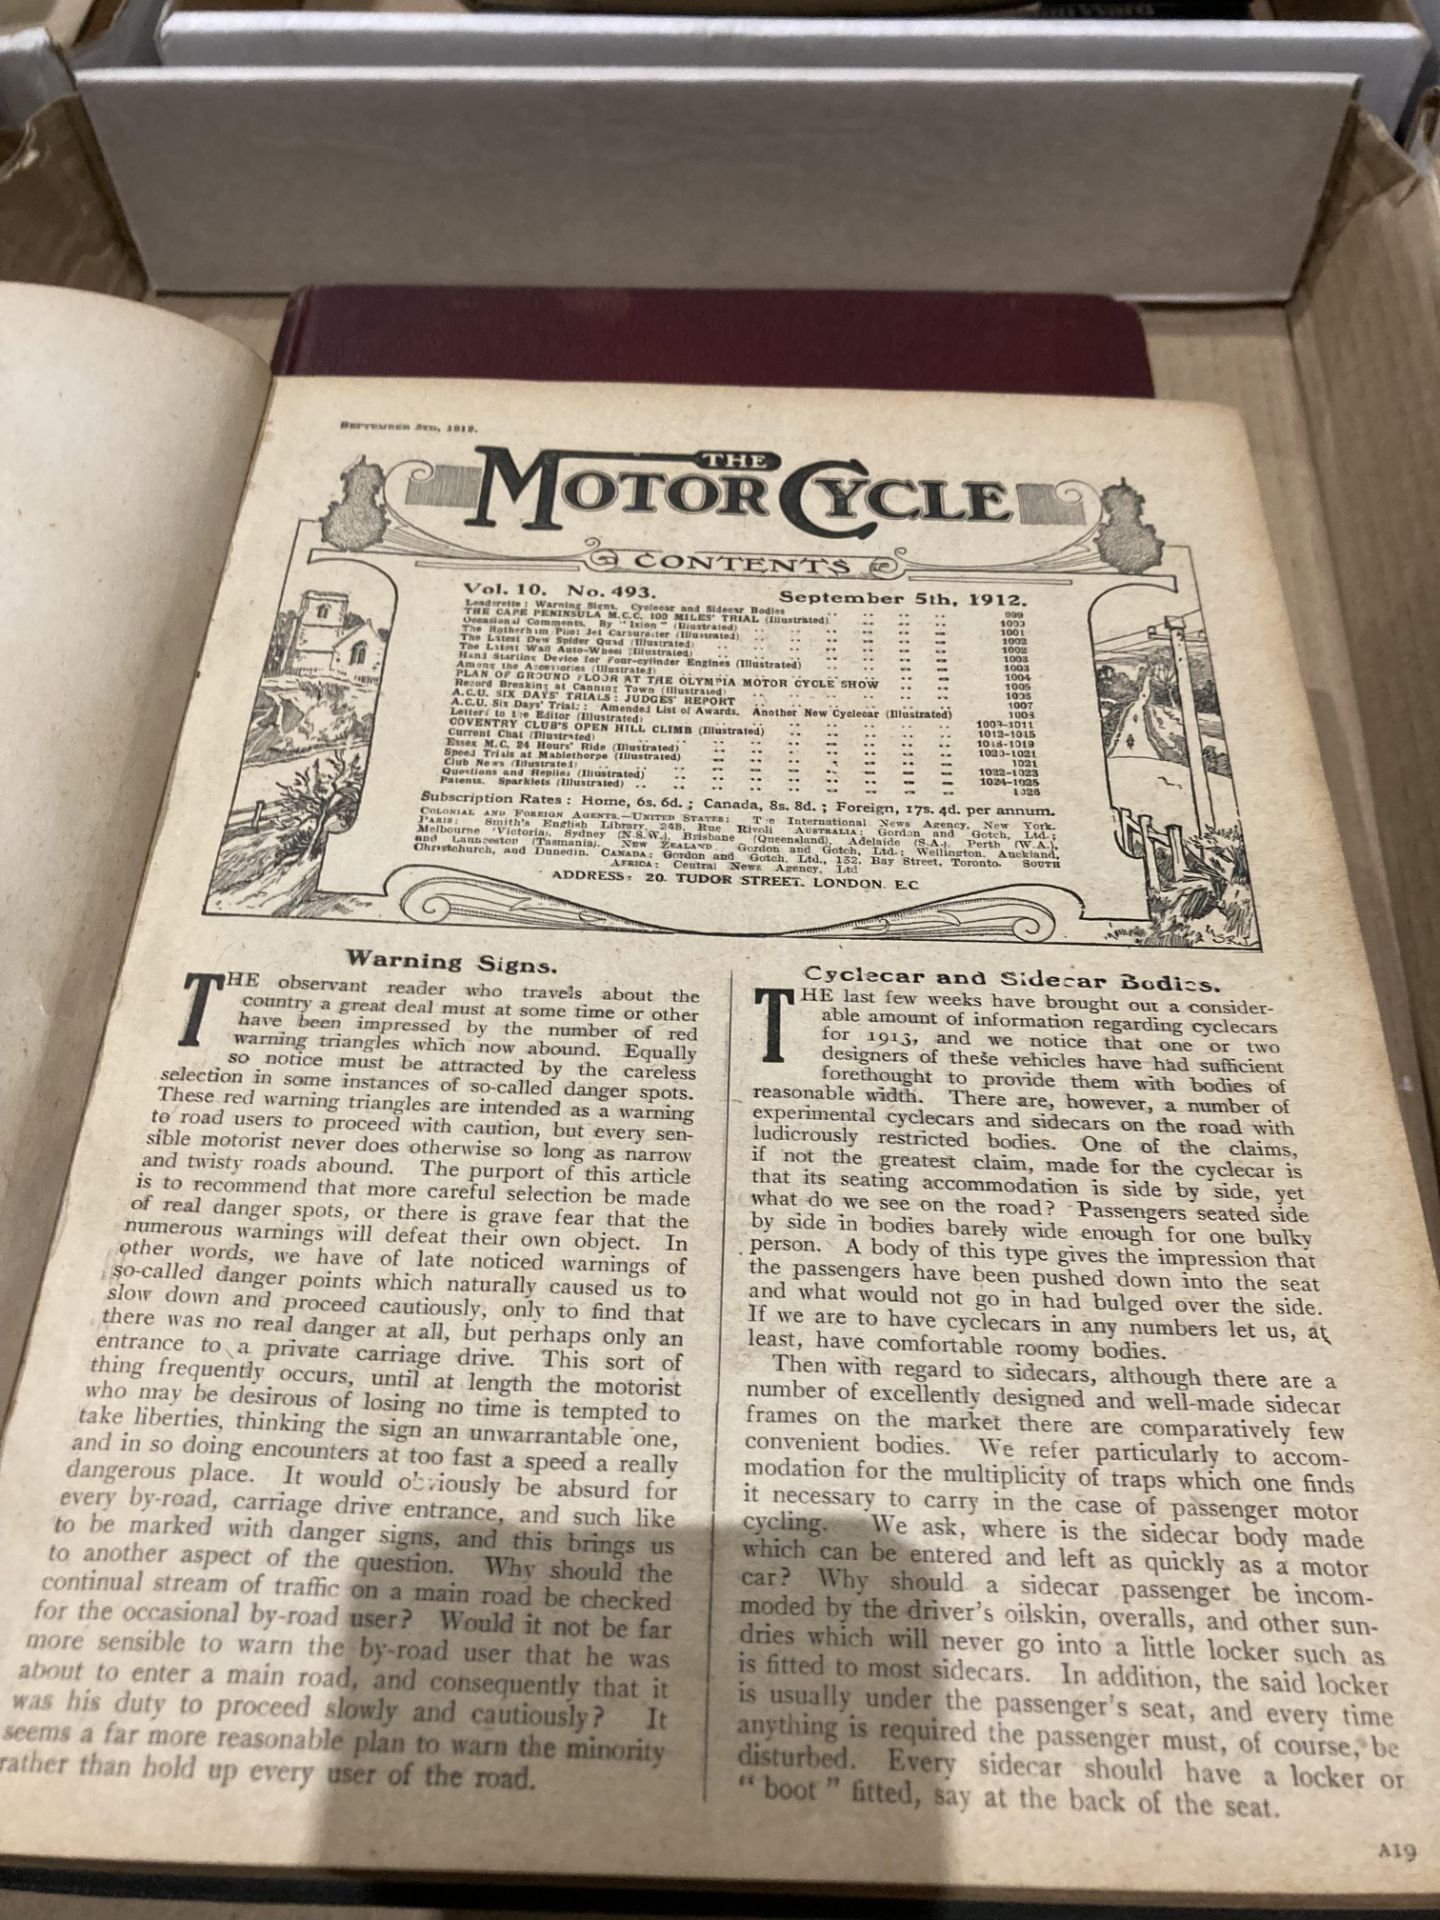 Motor Cycle, vols 2 & 3 of 1912 from vol 10 no 475, - Image 9 of 17